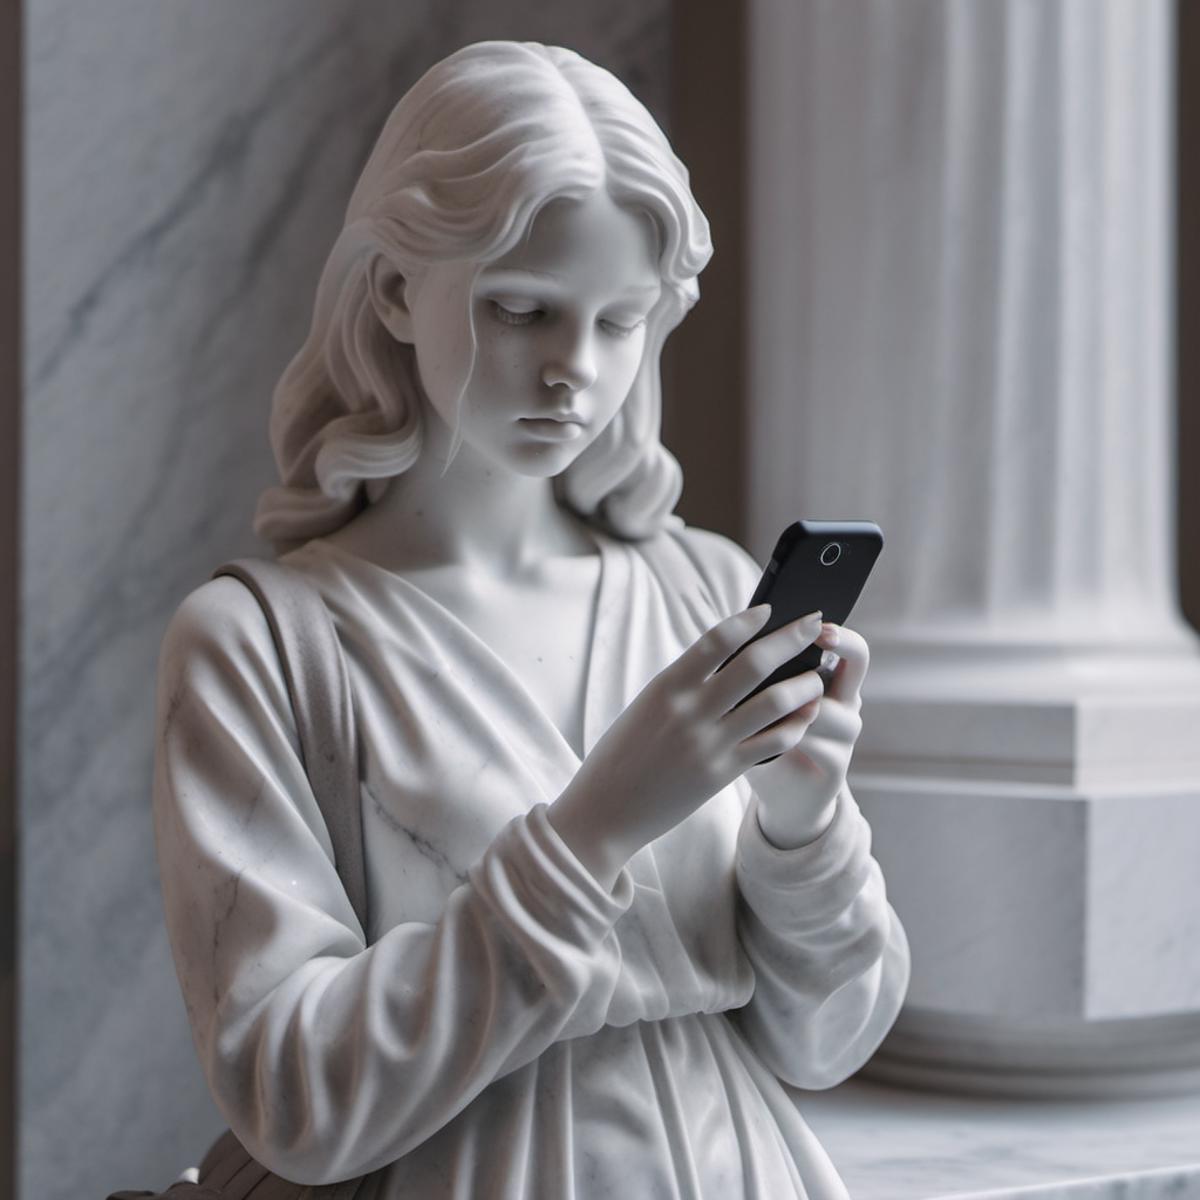 A statue of a girl looking at her cell phone.